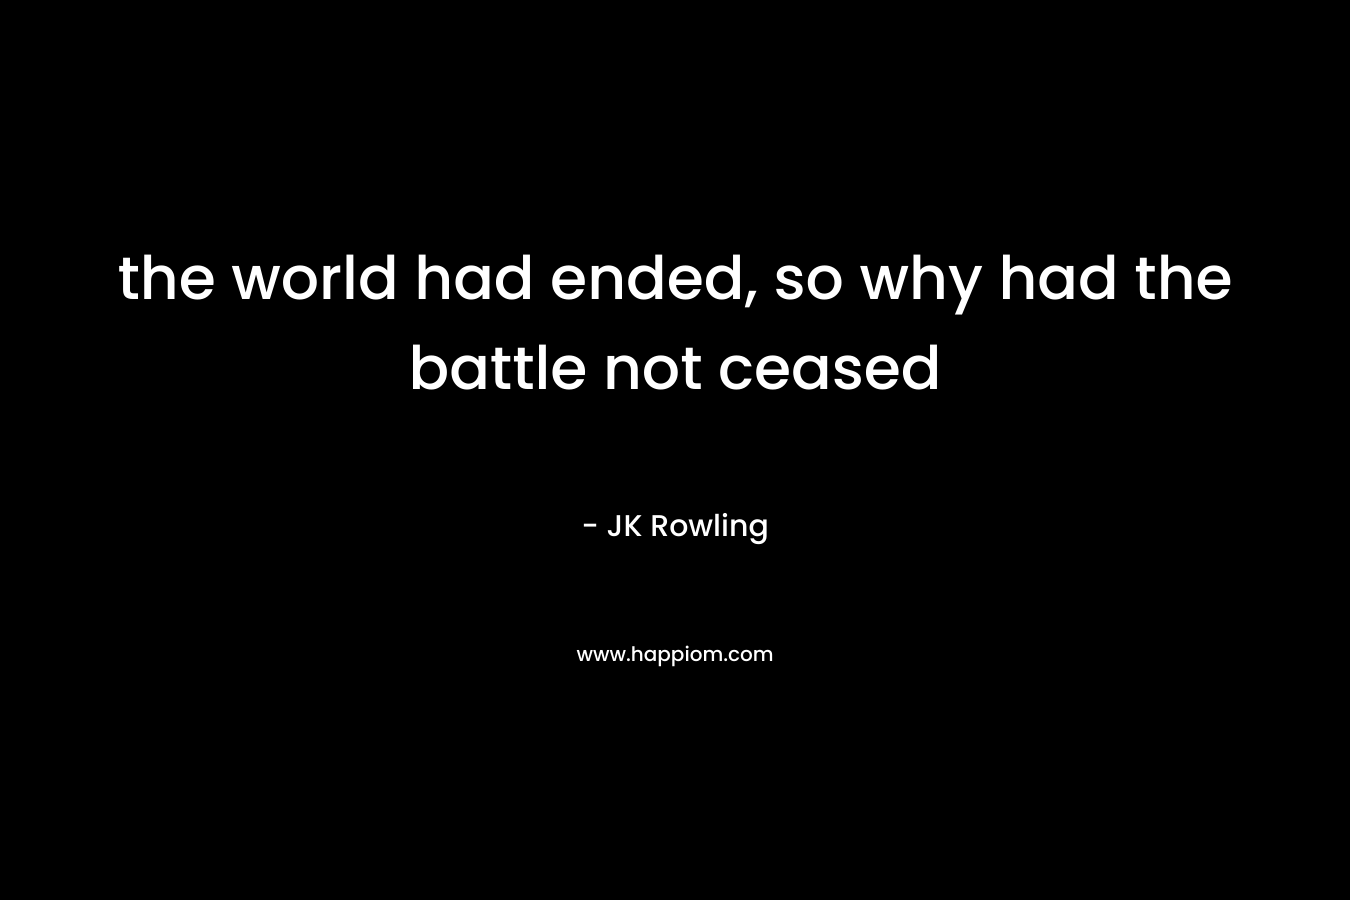 the world had ended, so why had the battle not ceased